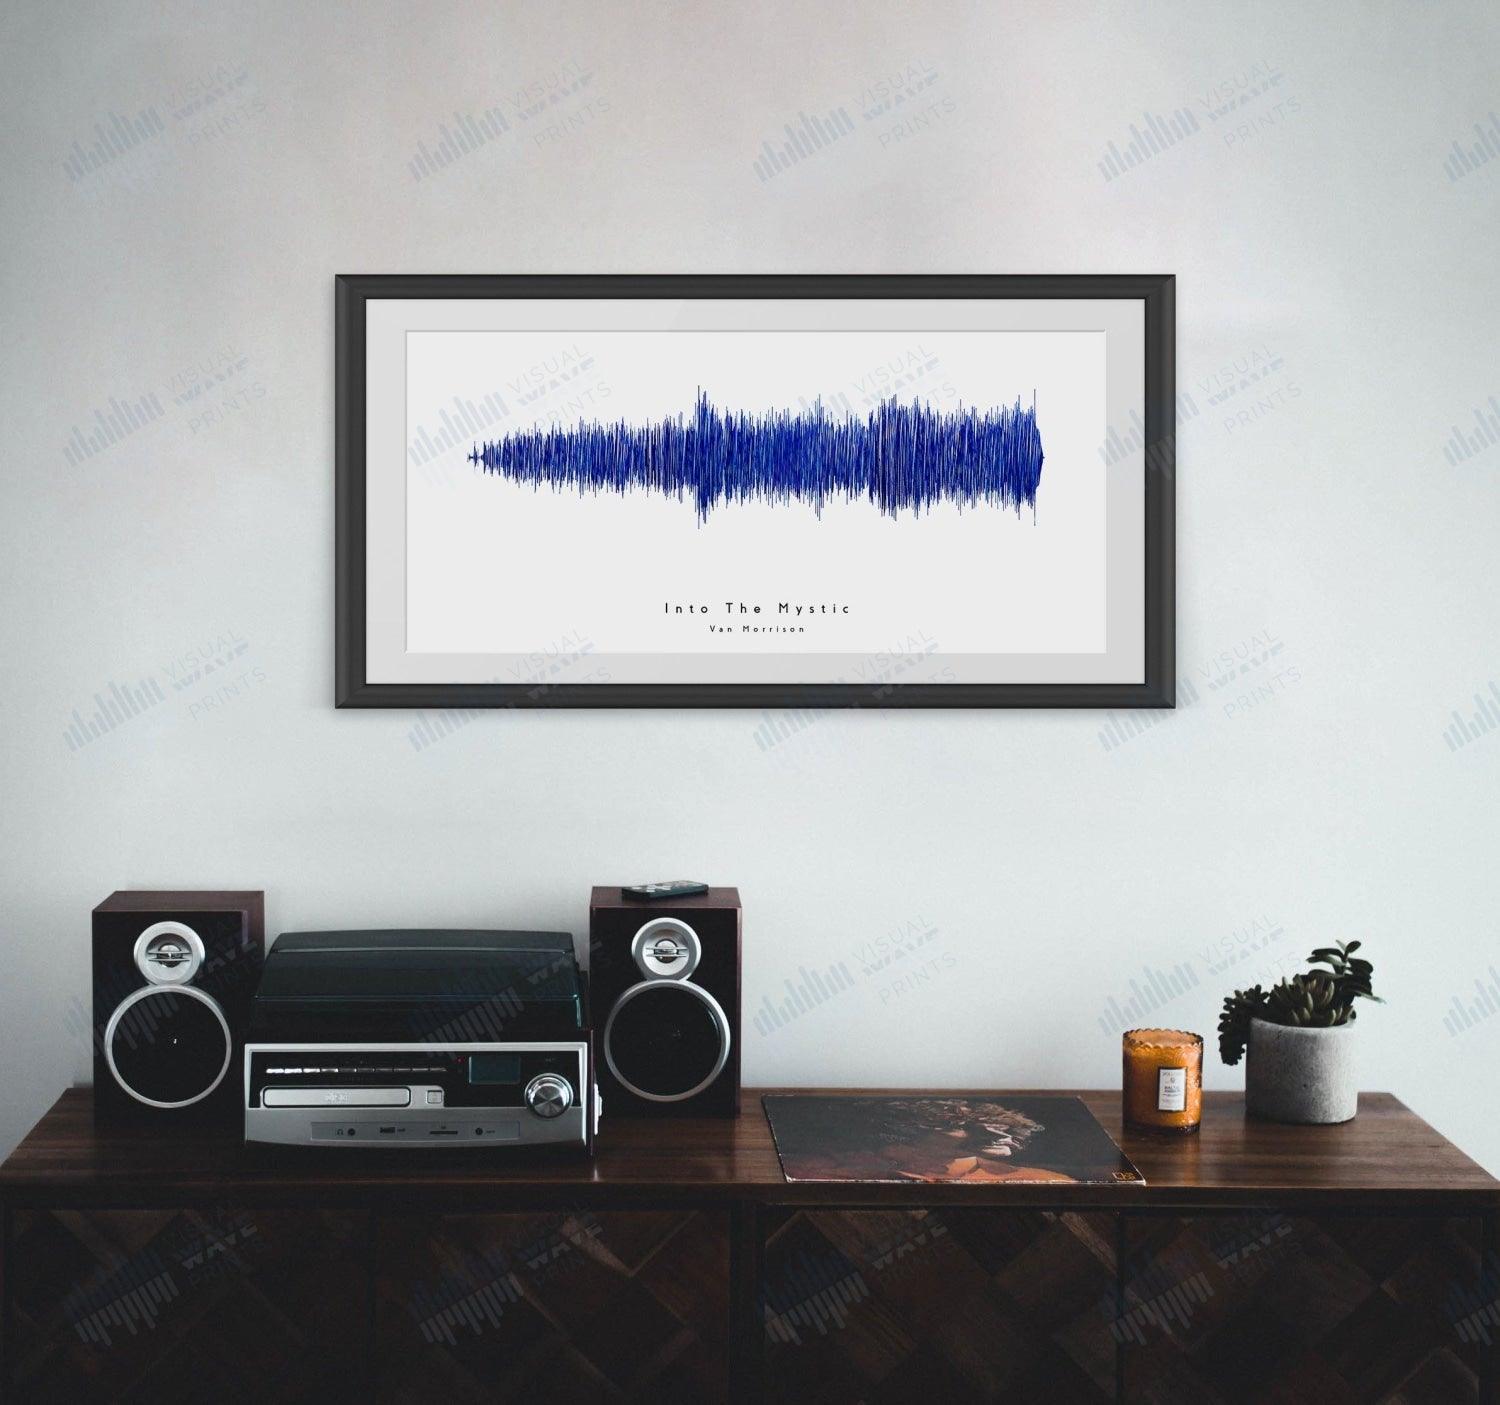 Into the Mystic by Van Morrison - Visual Wave Prints